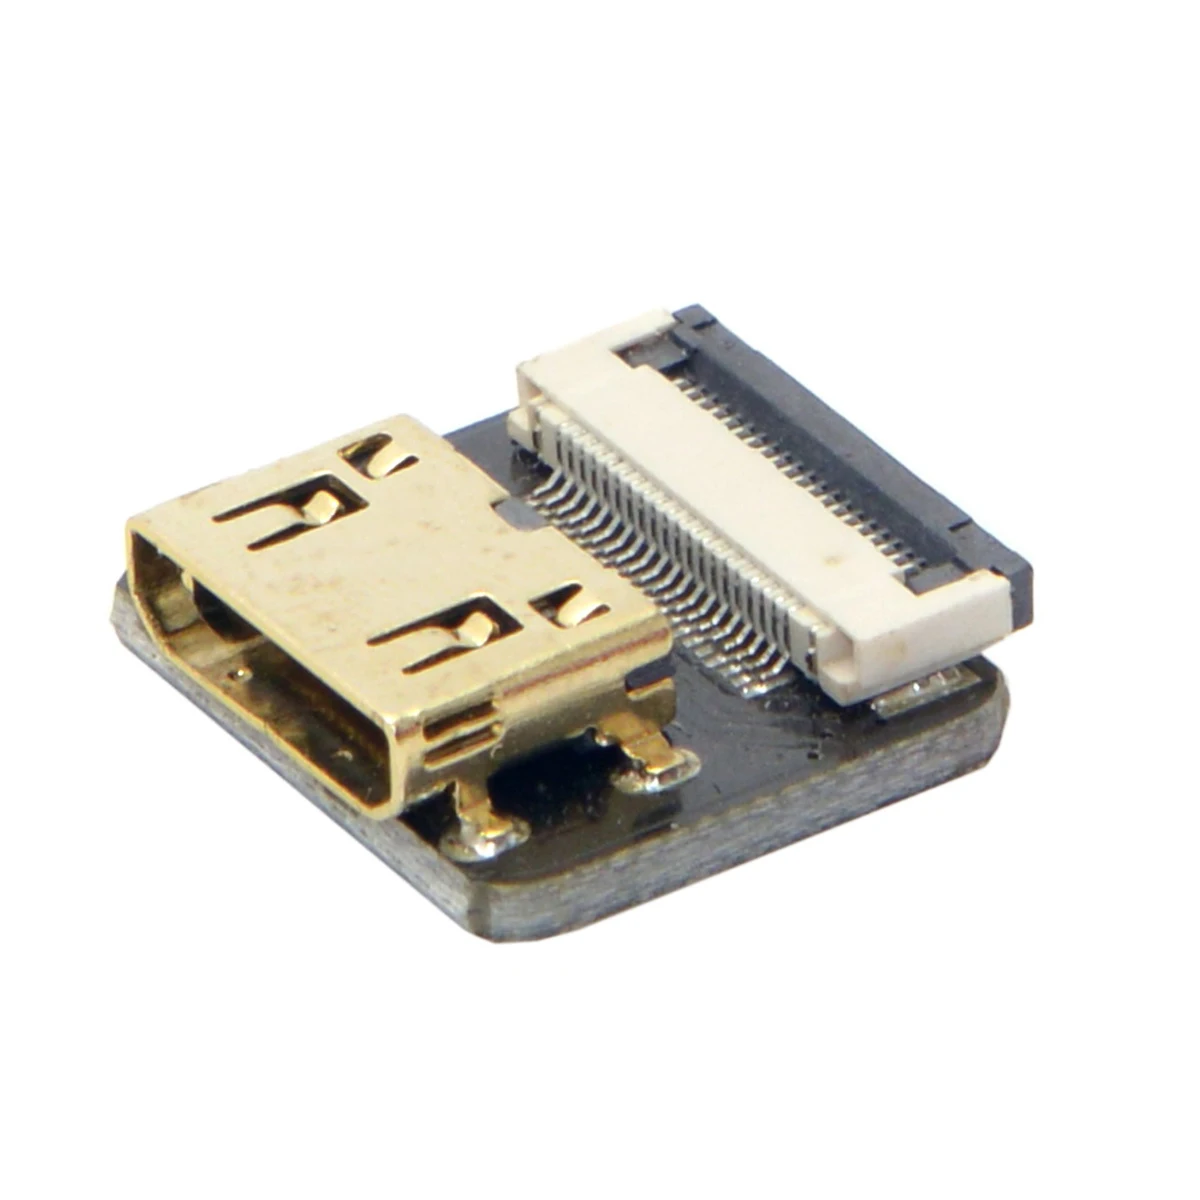 

Chenyang CYFPV Mini HDMI-compatible Type C Female Connector Socket for FPV HDTV Multicopter Aerial Photography